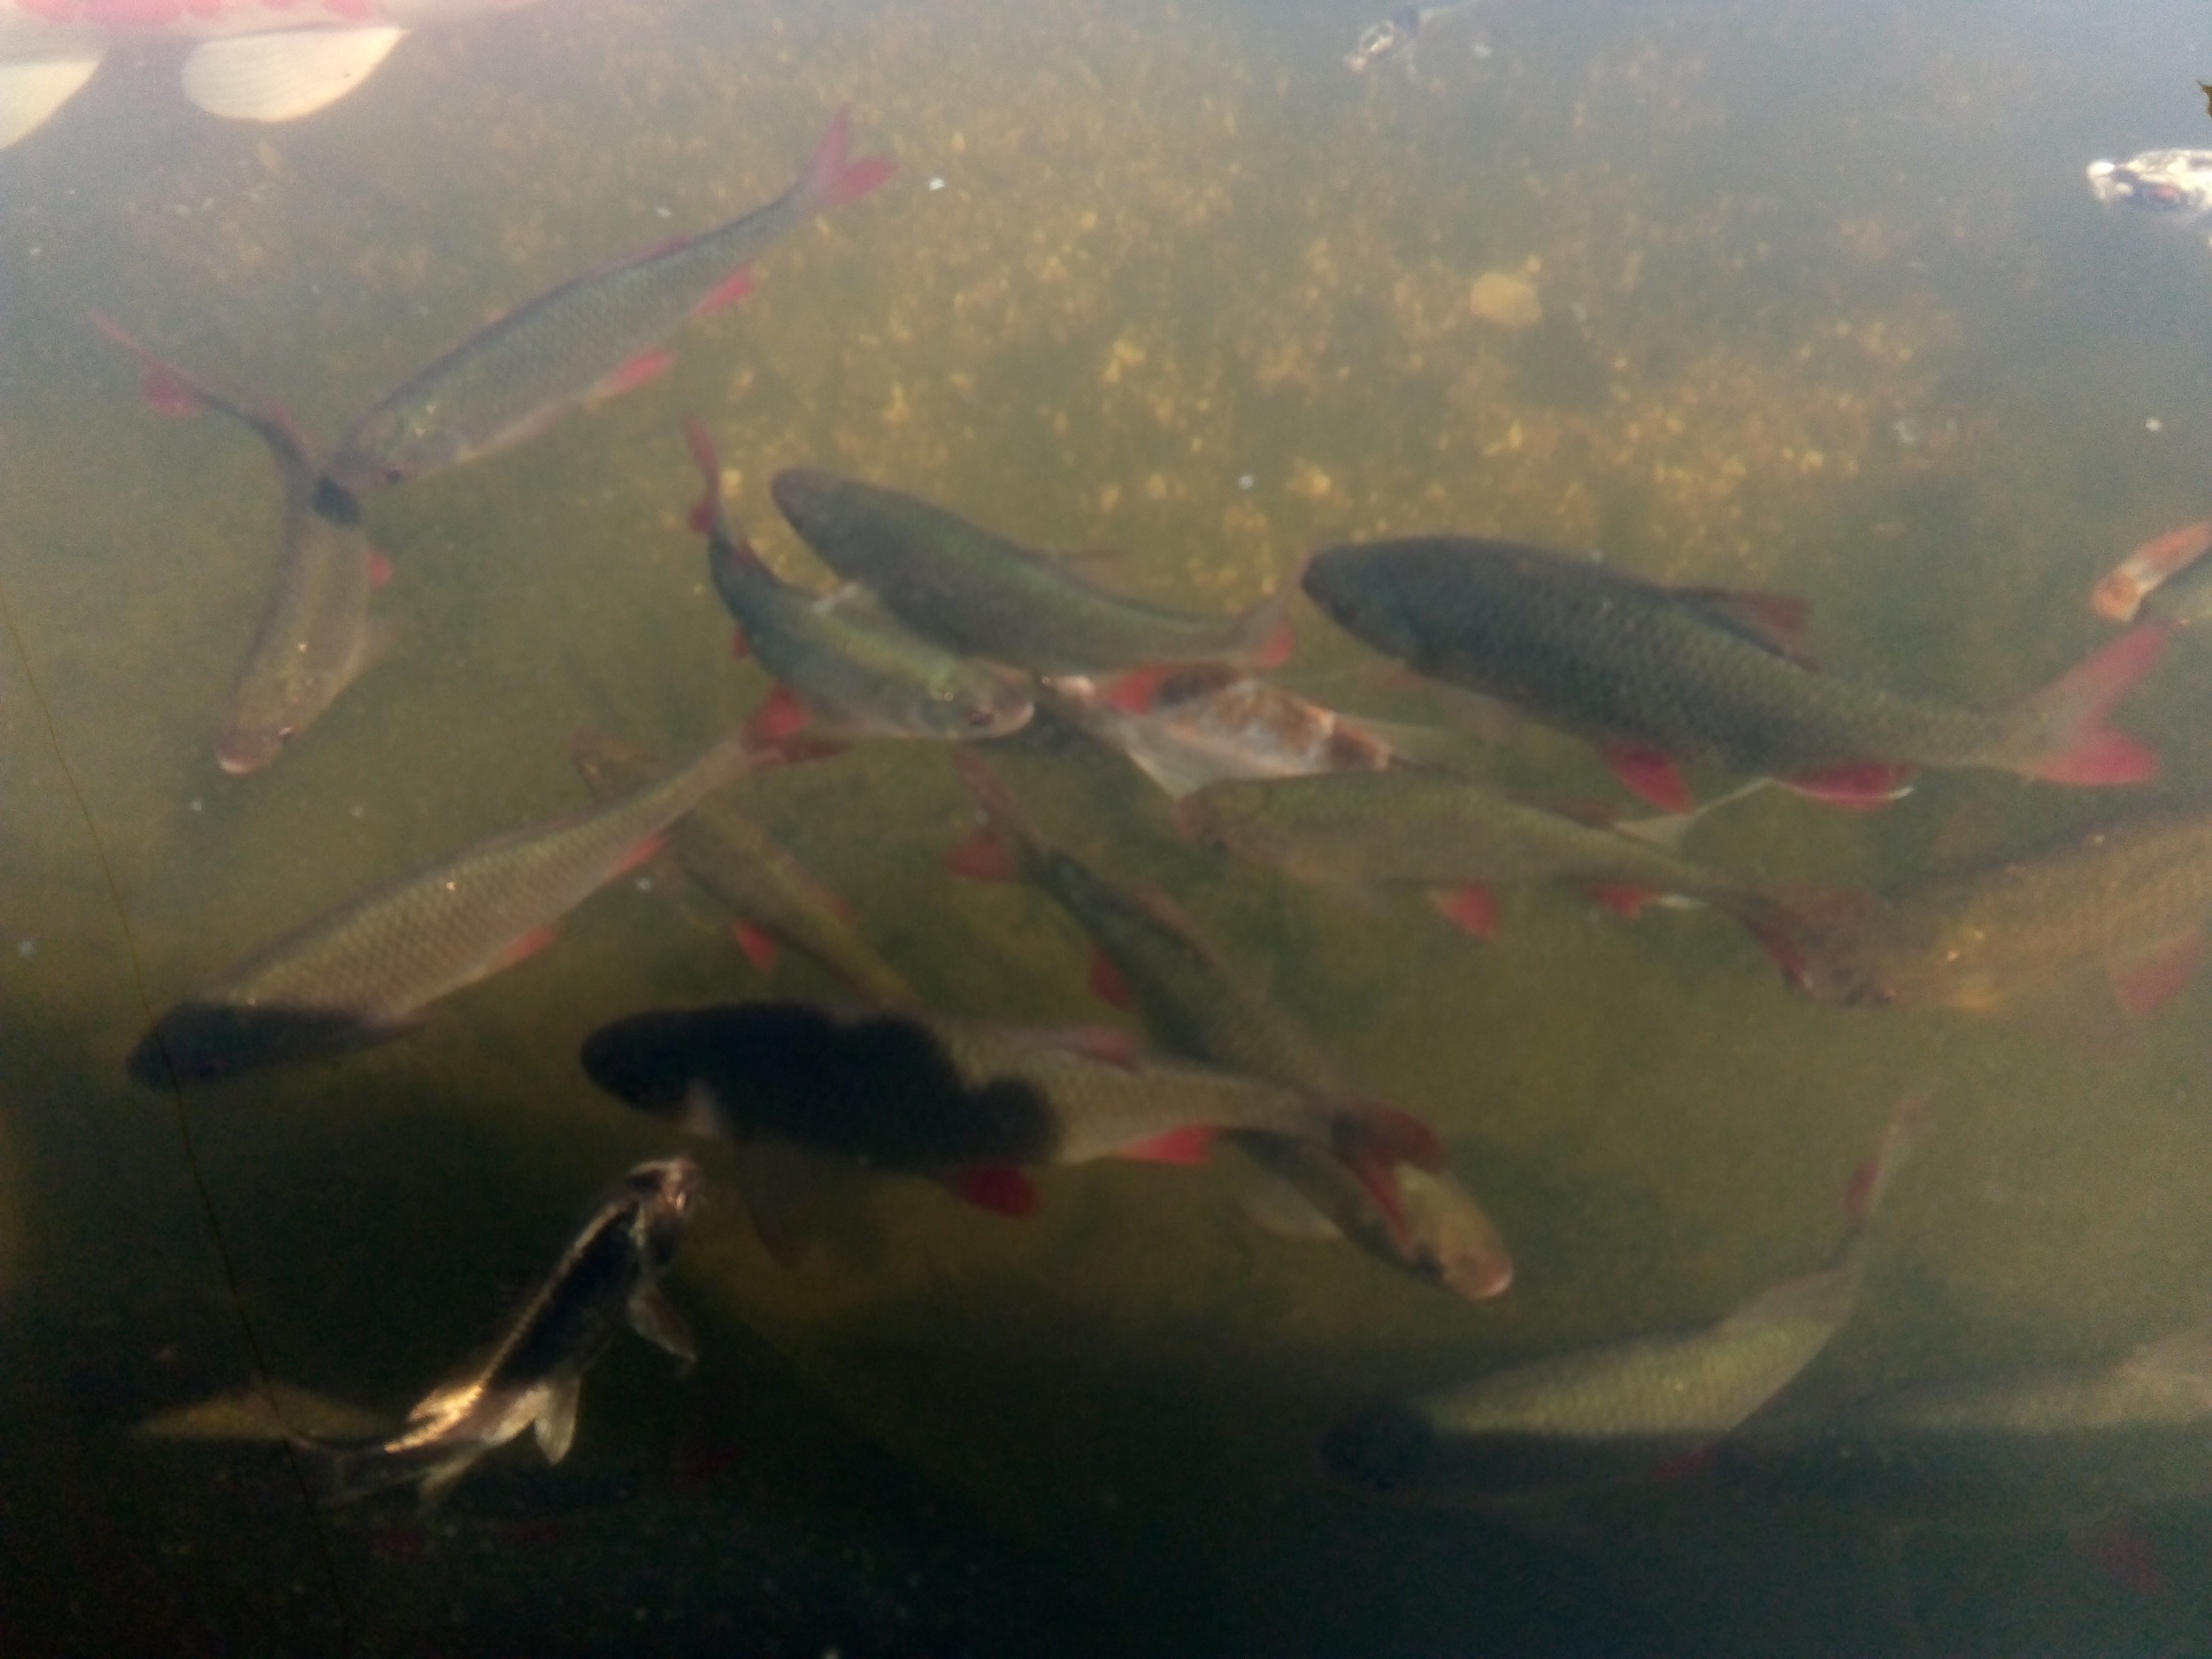 Numerous fish, mainly silver with red fins, swim in a freshwater pond in the sunshine